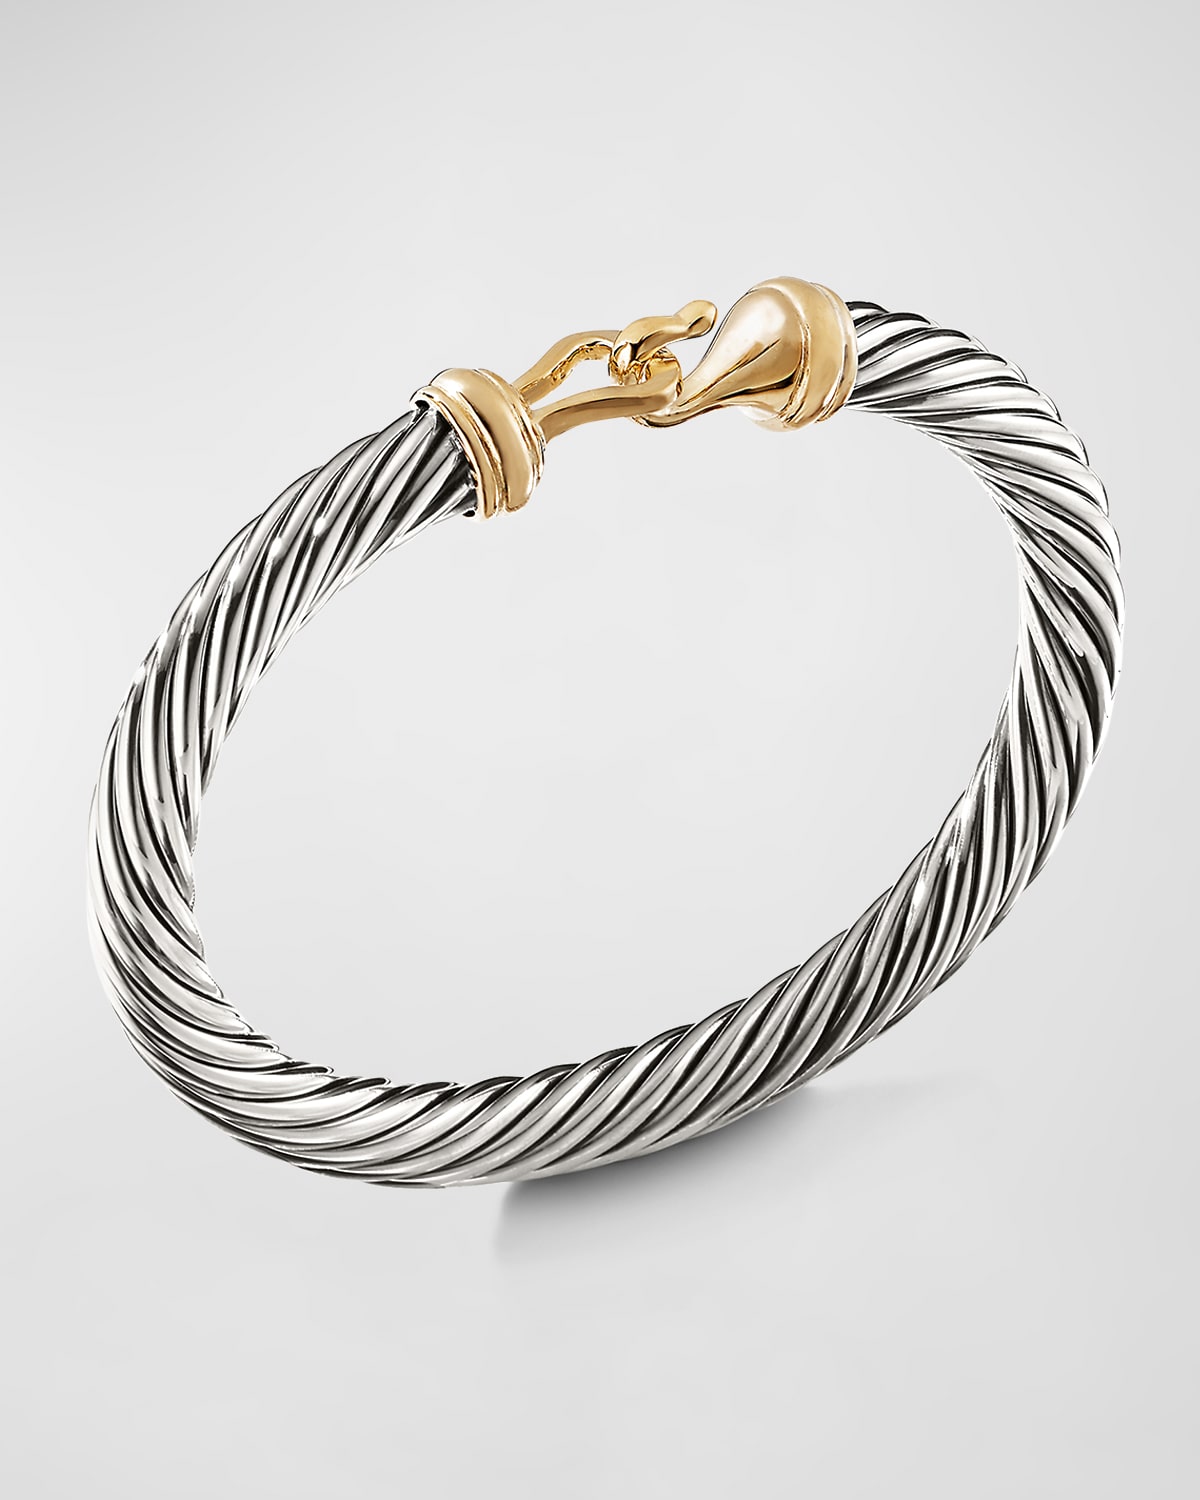 DAVID YURMAN 7MM CABLE BUCKLE BRACELET WITH GOLD